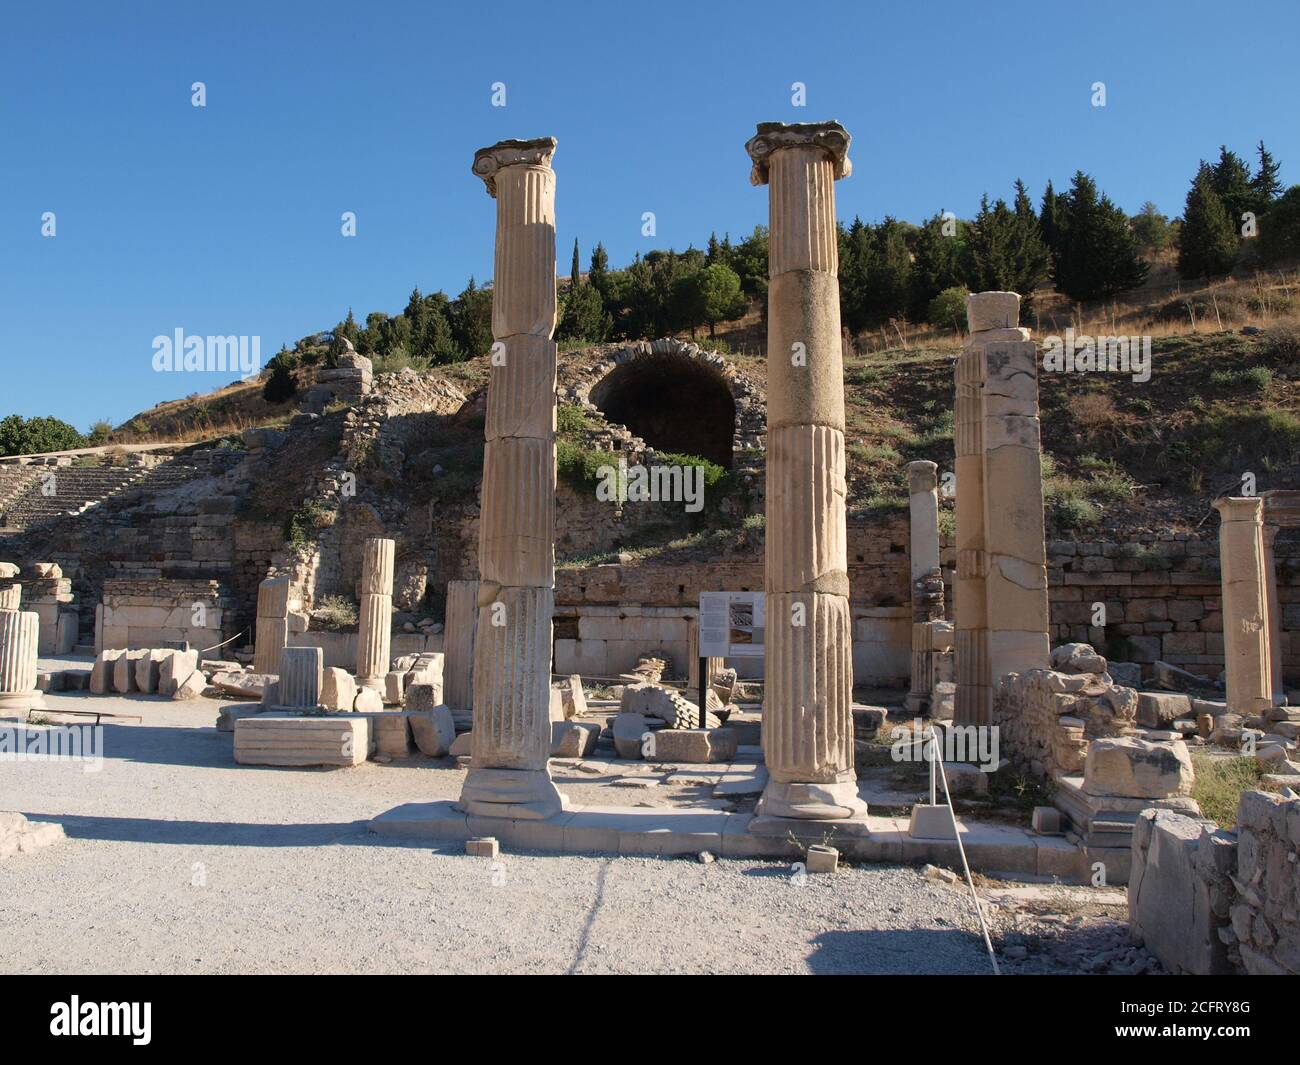 Just two columns remaining Stock Photo